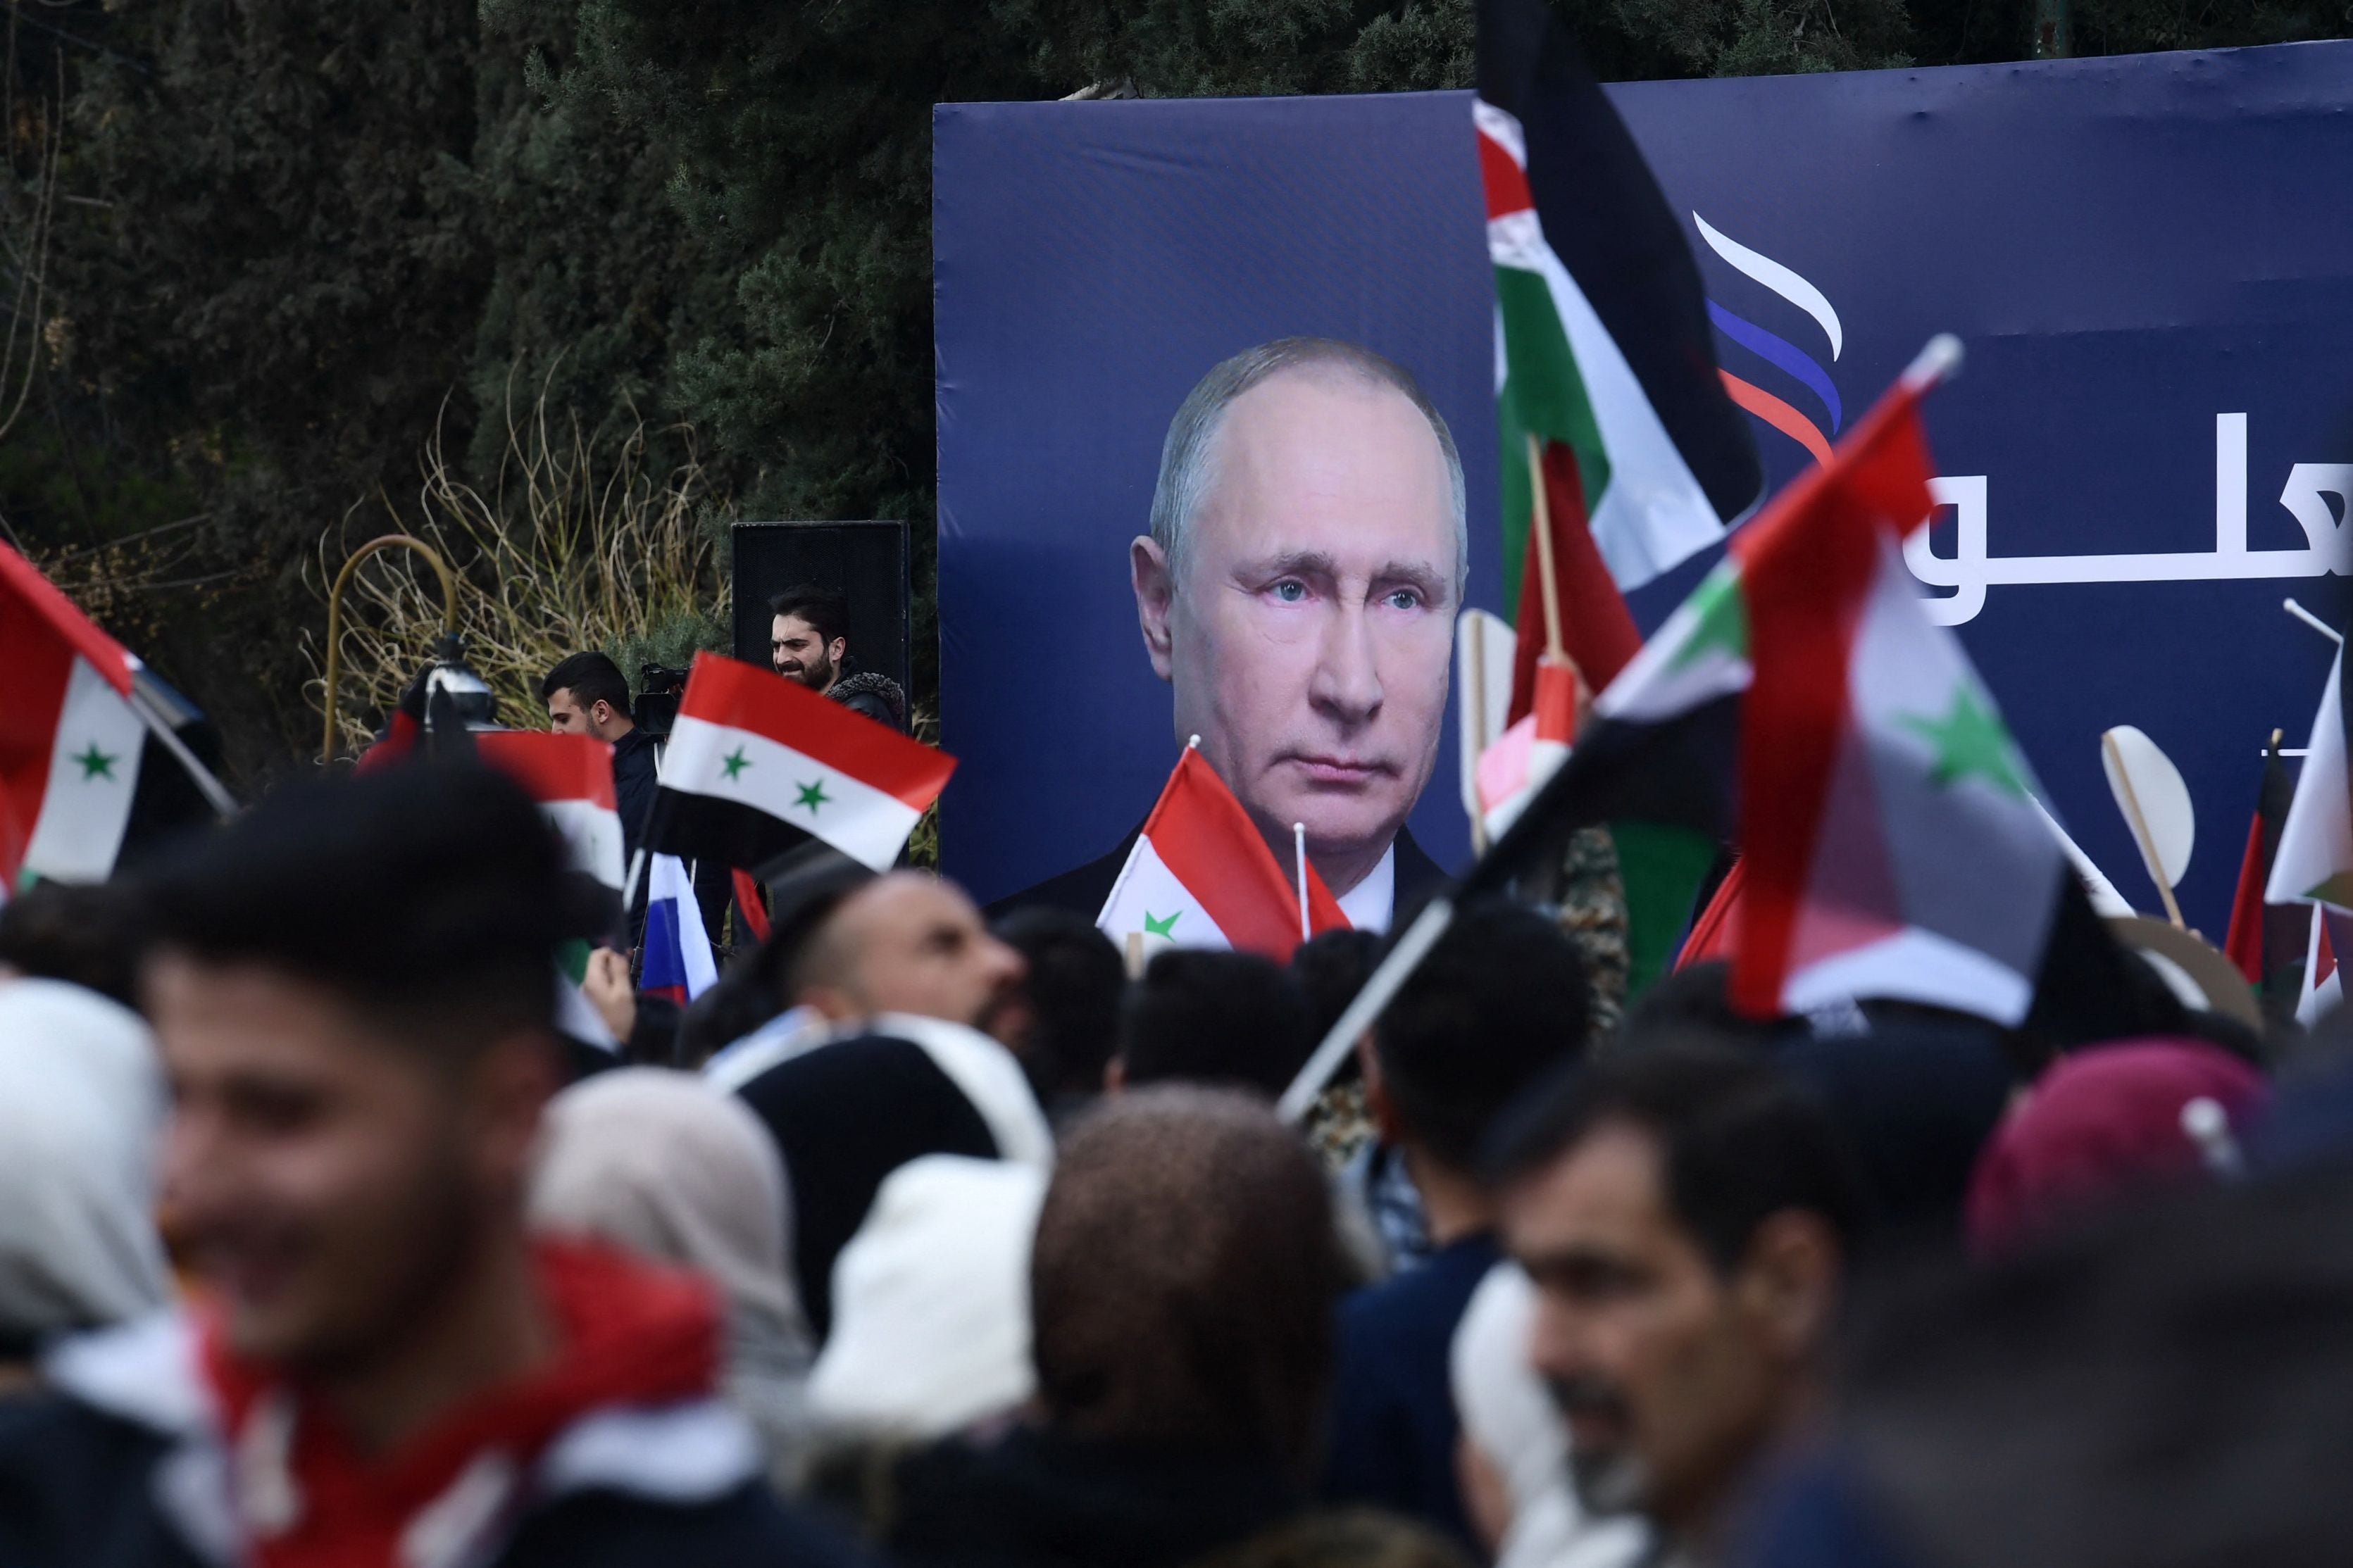 Syrian students wave Syrian, Russian and Palestinian flags in a pro-Russian demo